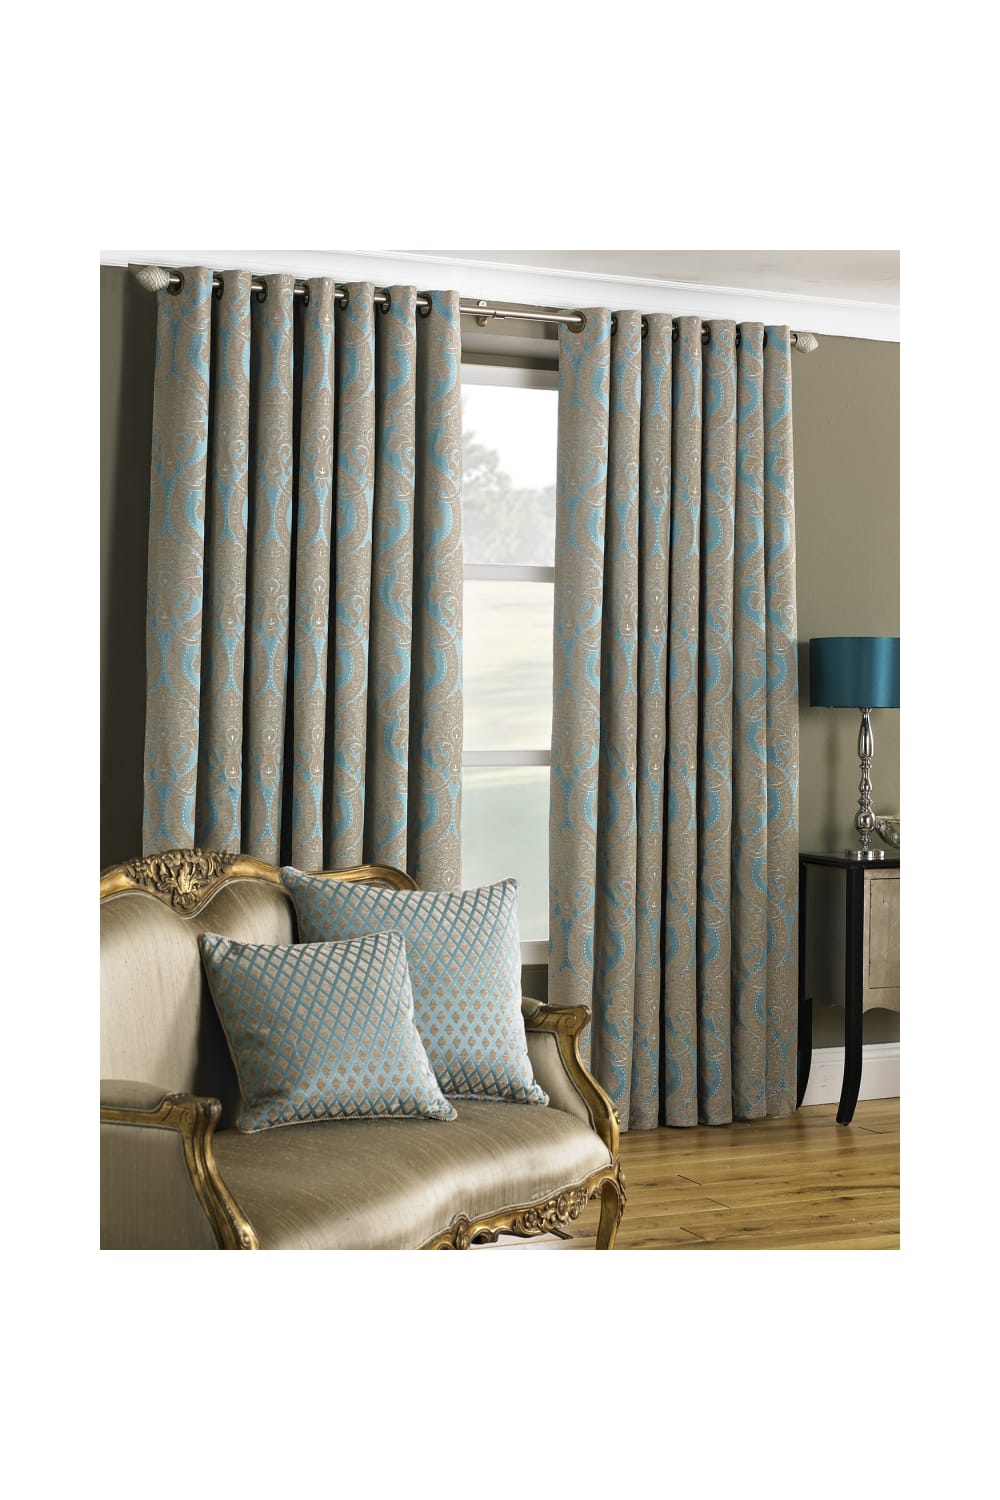 Riva Home Renaissance Ringtop Curtains (Turquoise) (90 x 90 inch)